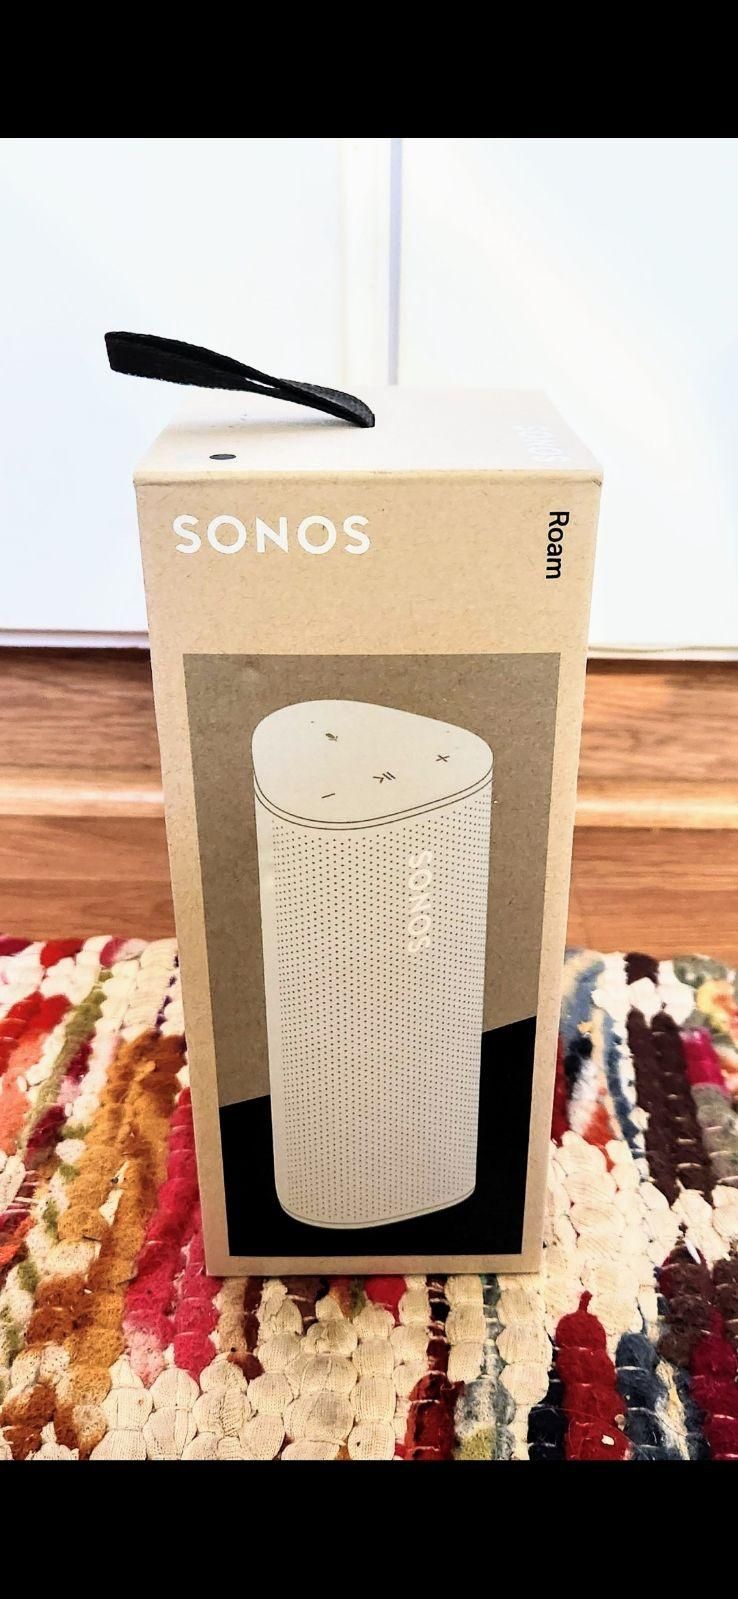 Sonos - BRAND NEW IN BOX Roam Smart Portable Wi-Fi and Bluetooth Speaker with Amazon Alexa and Google Assistant - White